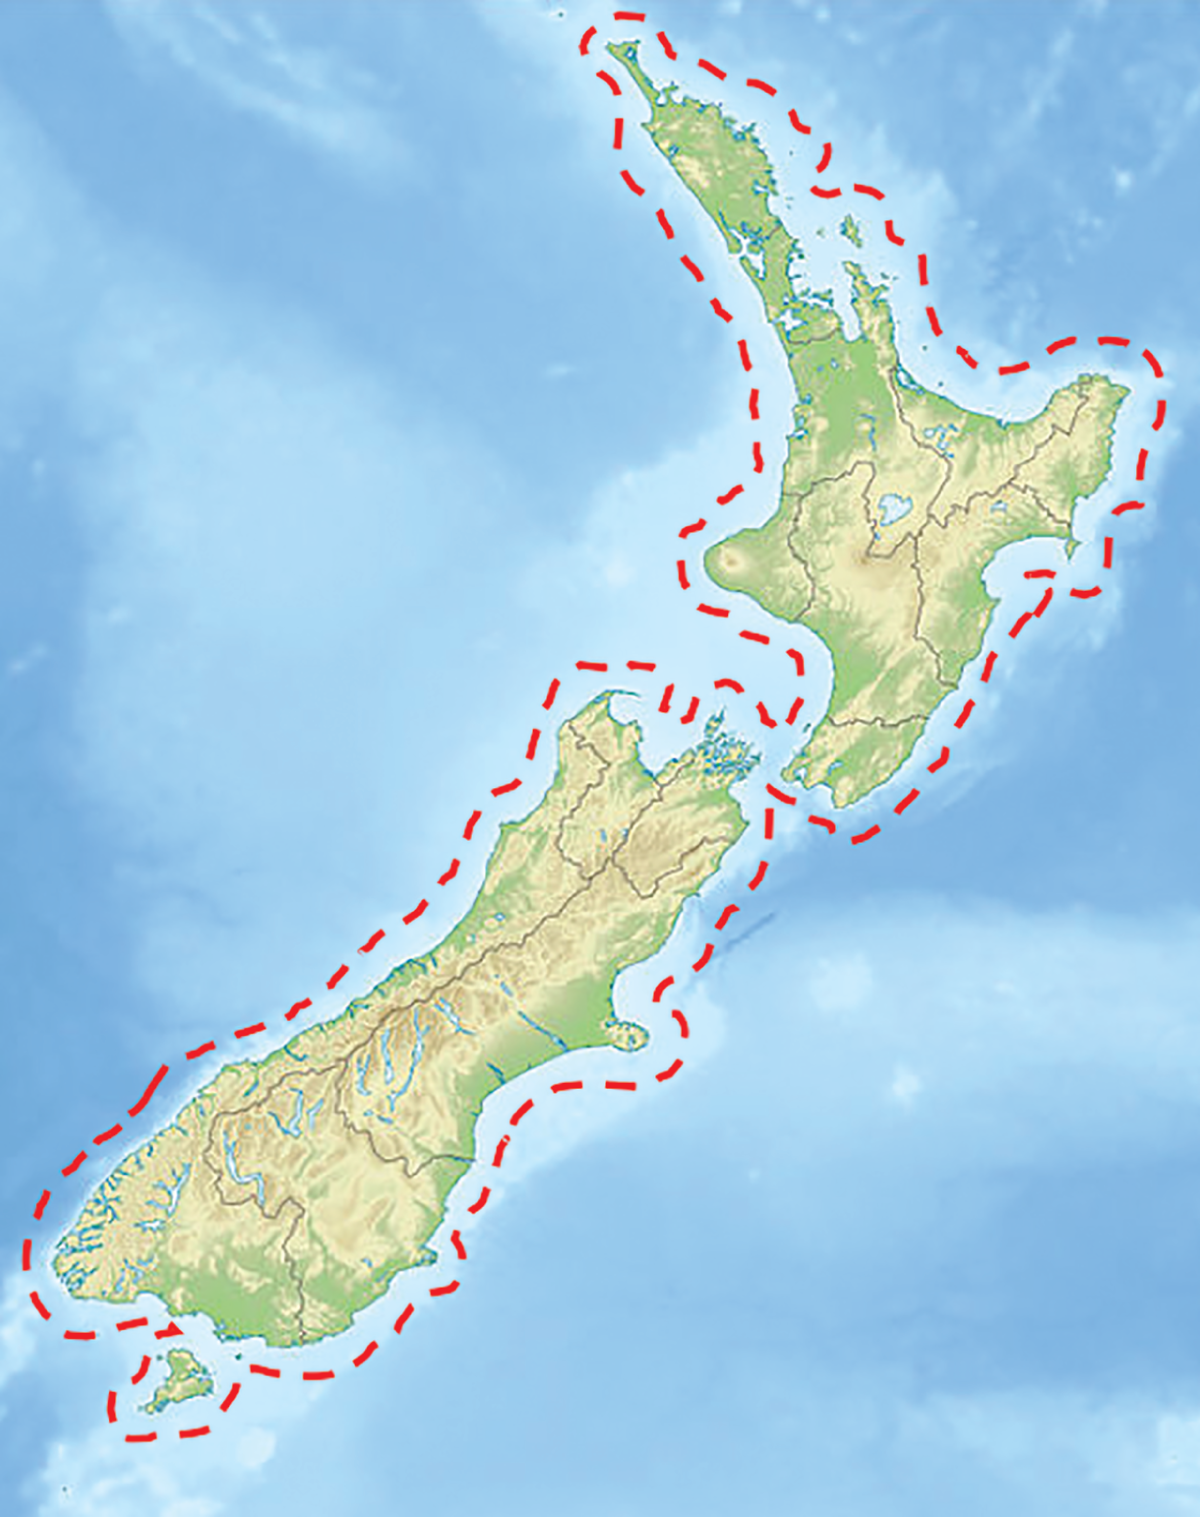 Map image depicting an  imagined circumnavigation of the New Zealand island pair.